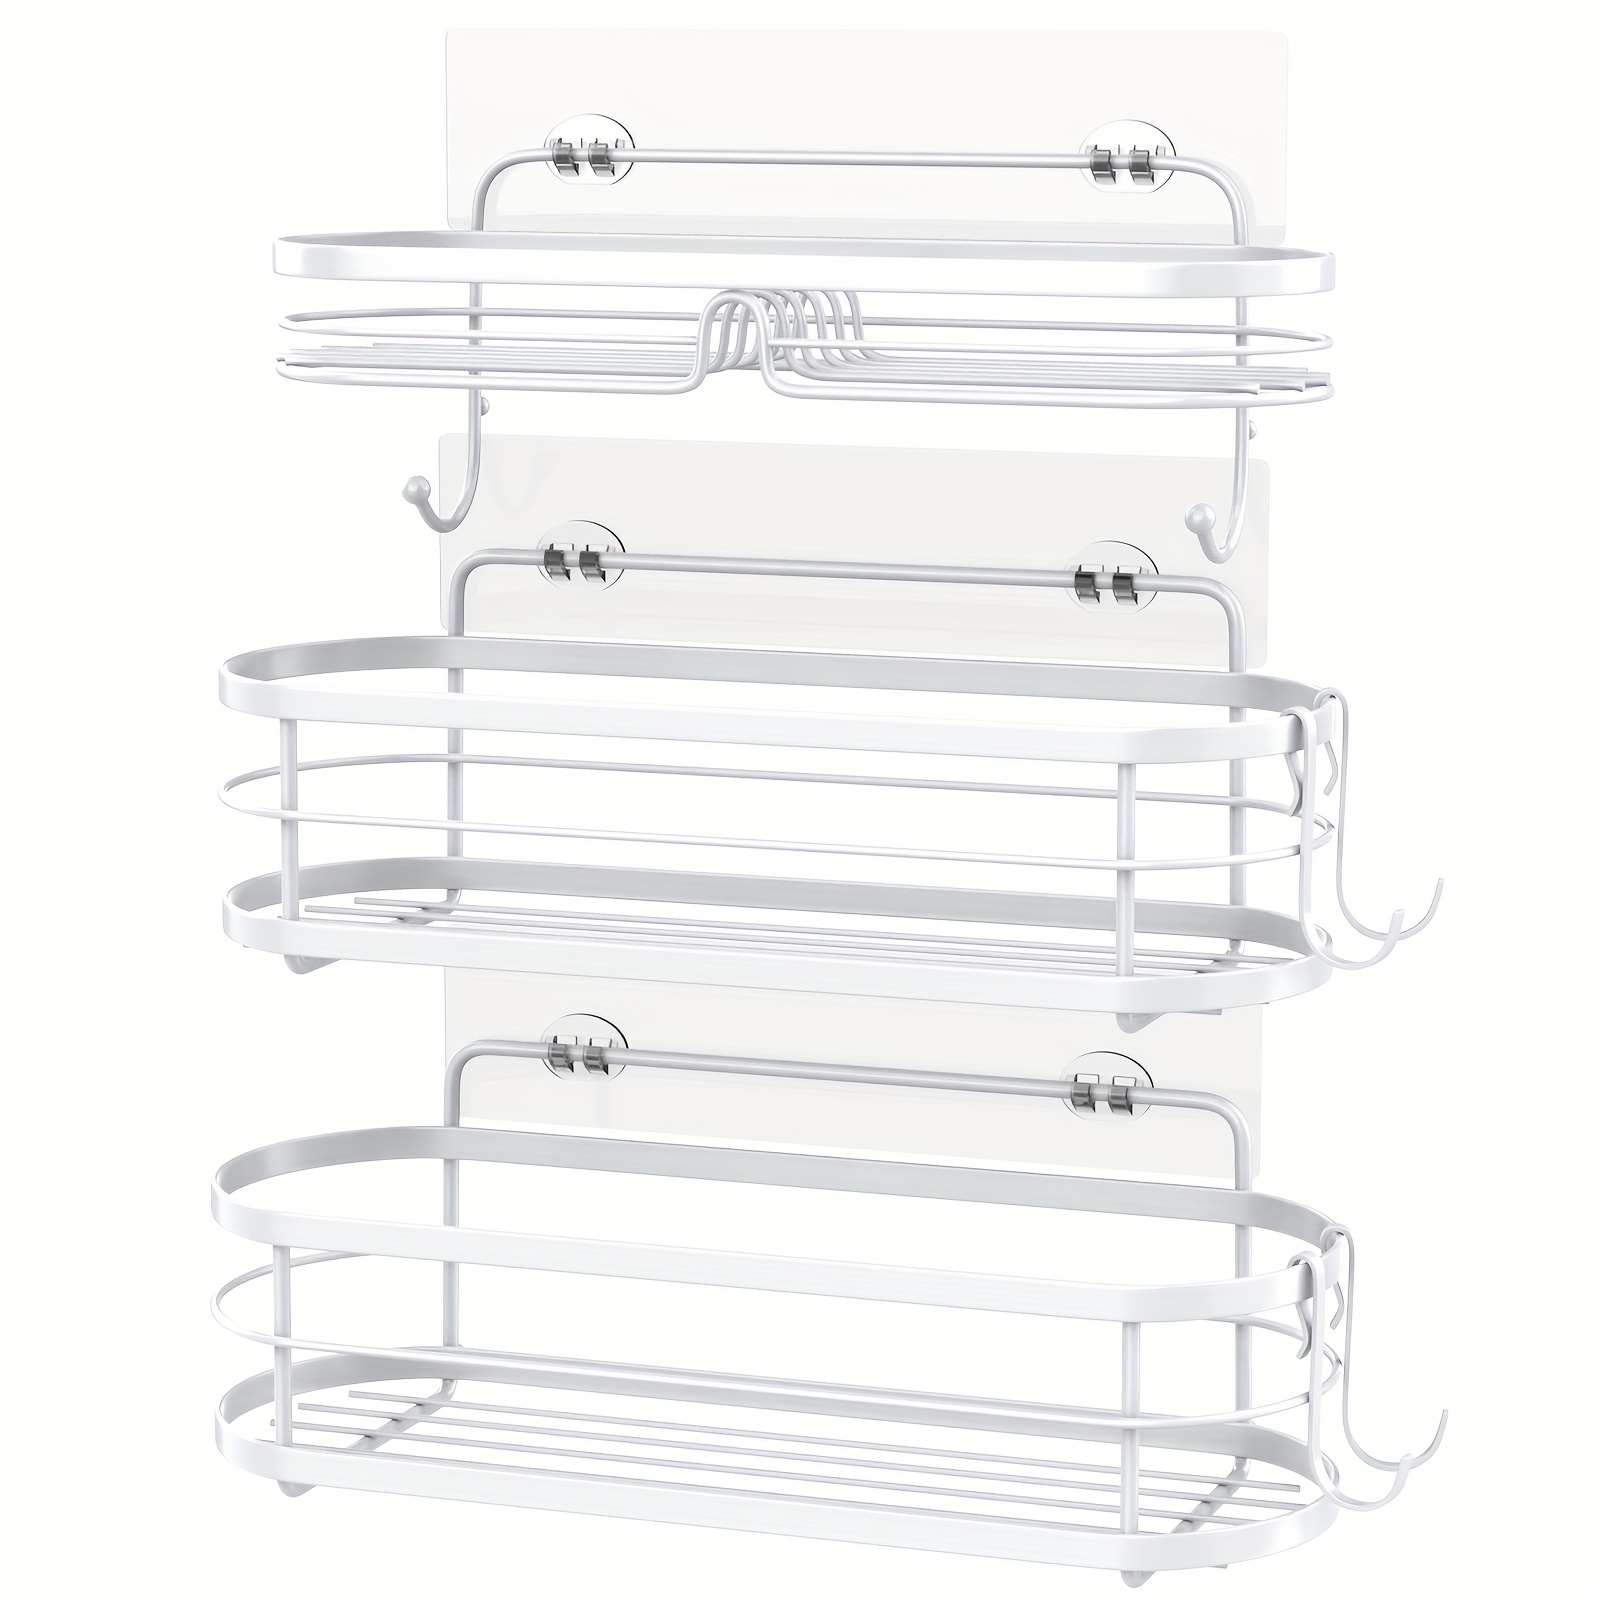 Adhesive Shower Caddy Shower Shelves Stainless Steel Self in Black, 3